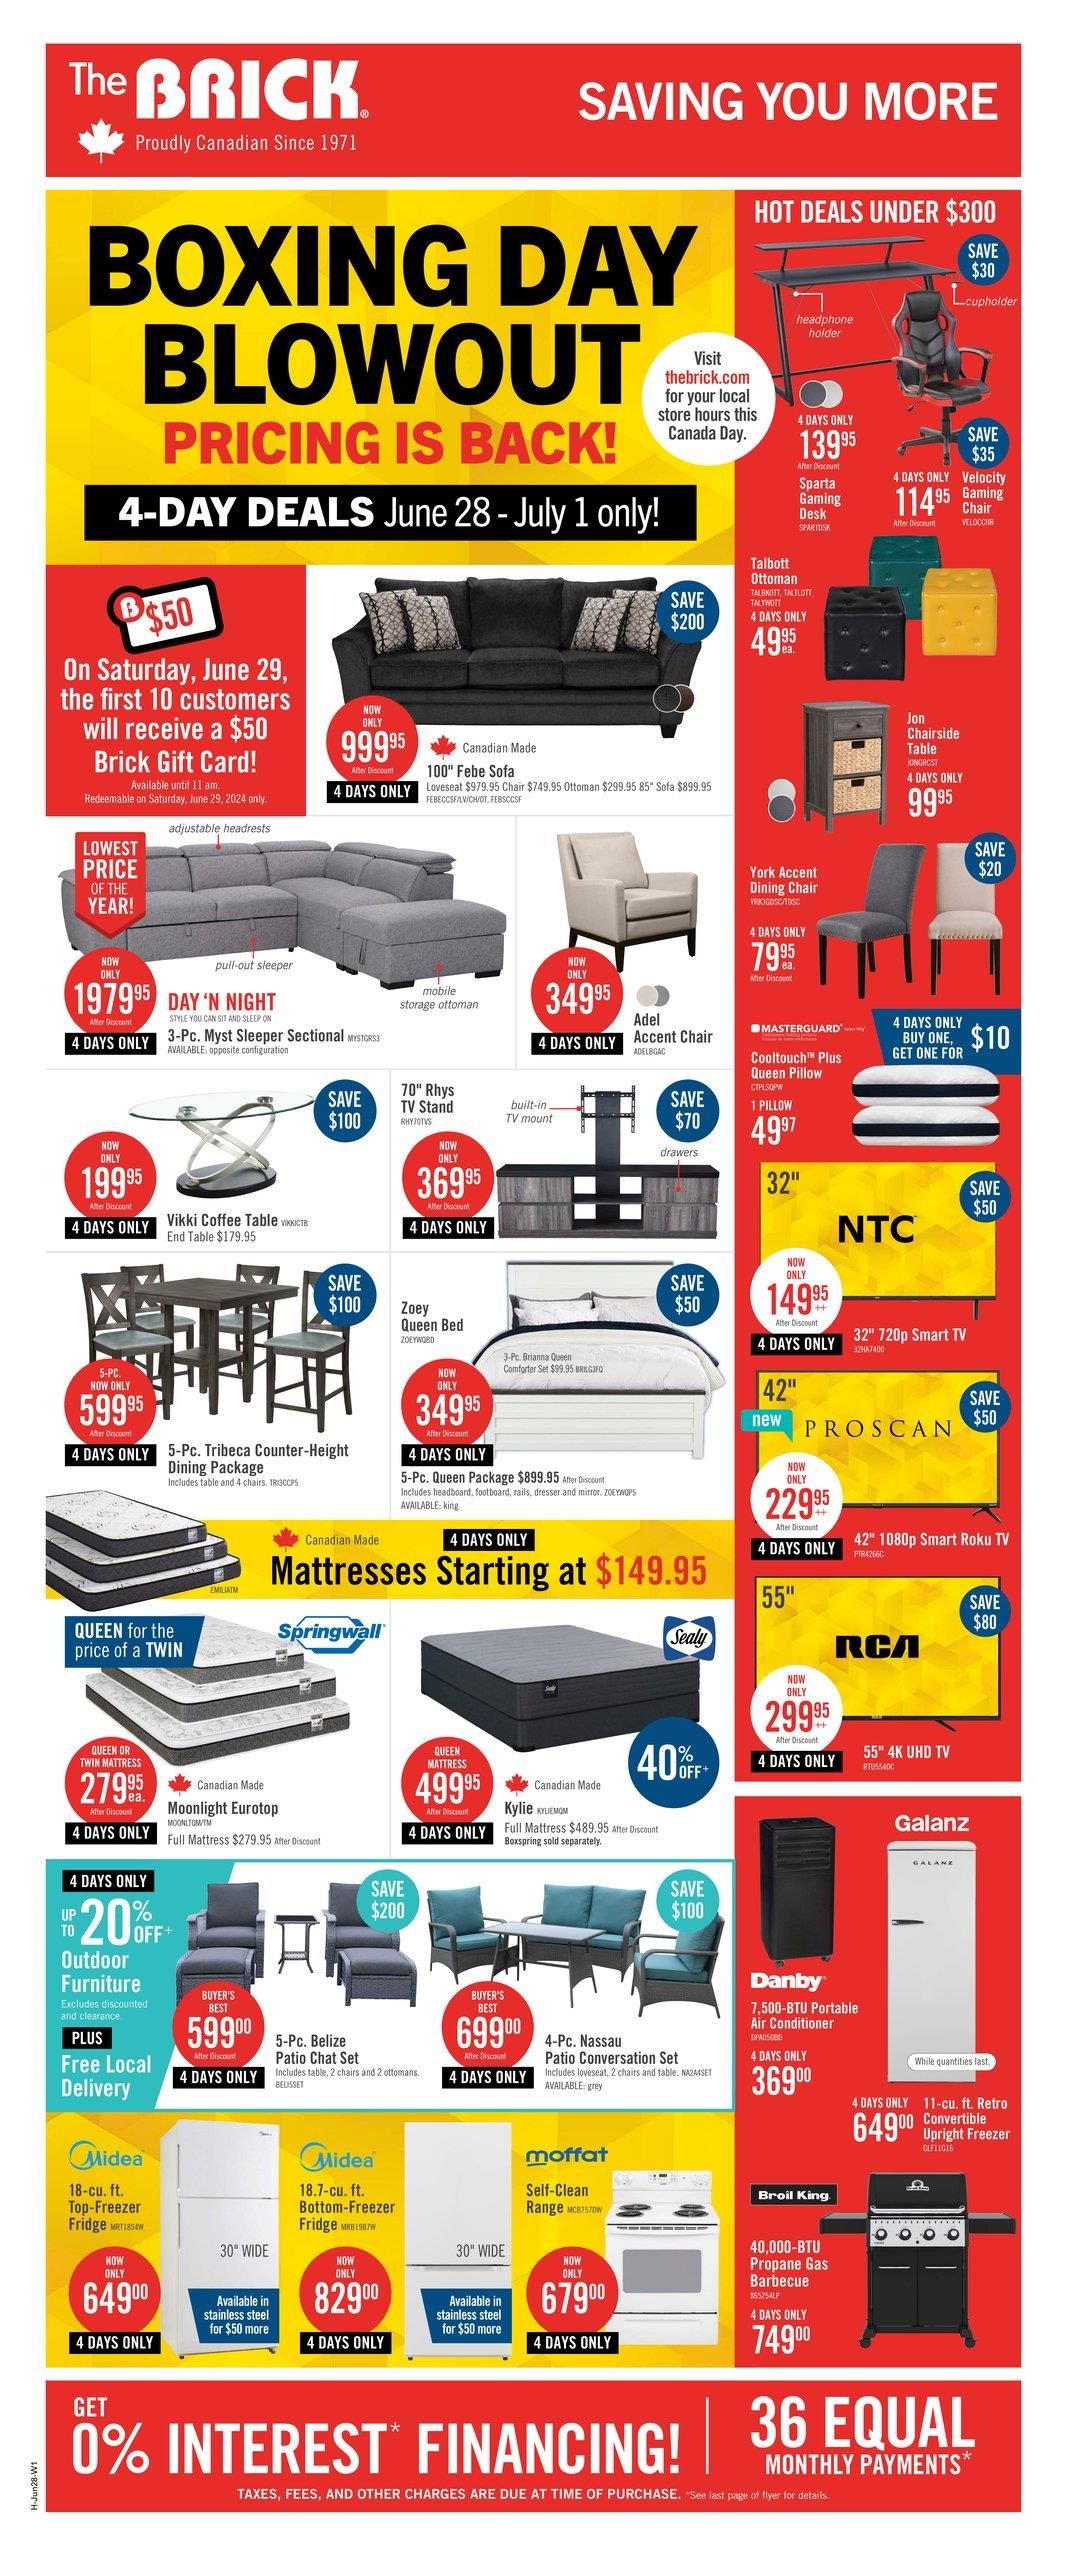 The Brick - Weekly Flyer Specials - Page 1